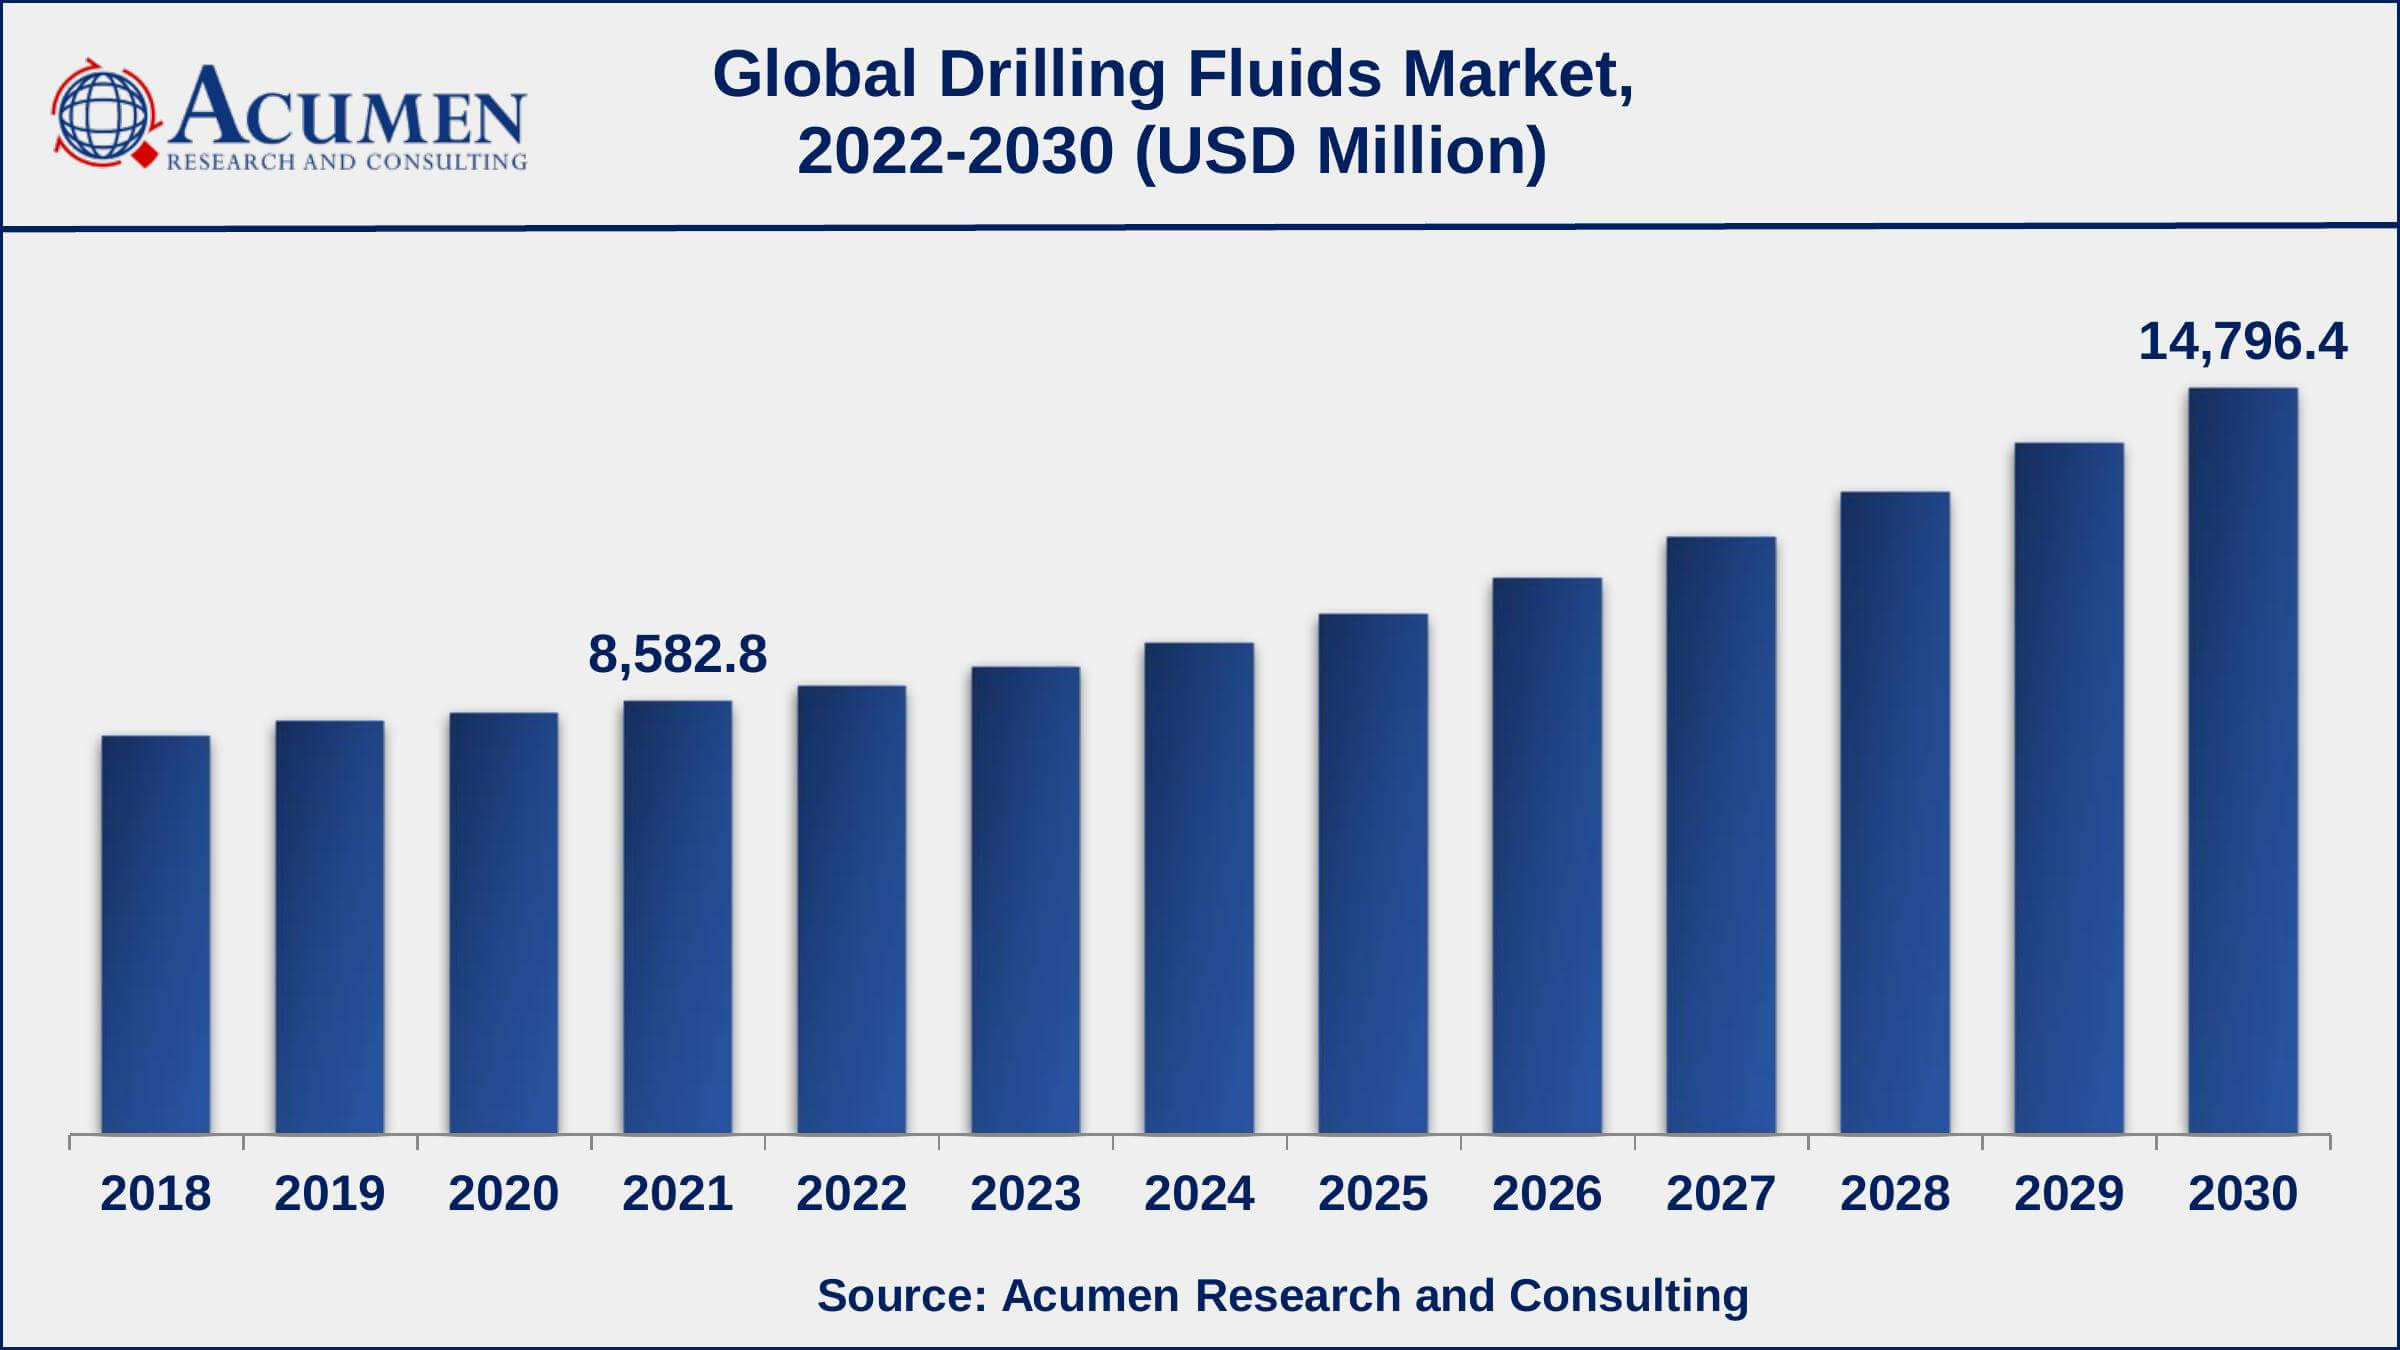 Asia-Pacific drilling fluids market growth will record noteworthy CAGR of over 8% from 2022 to 2030